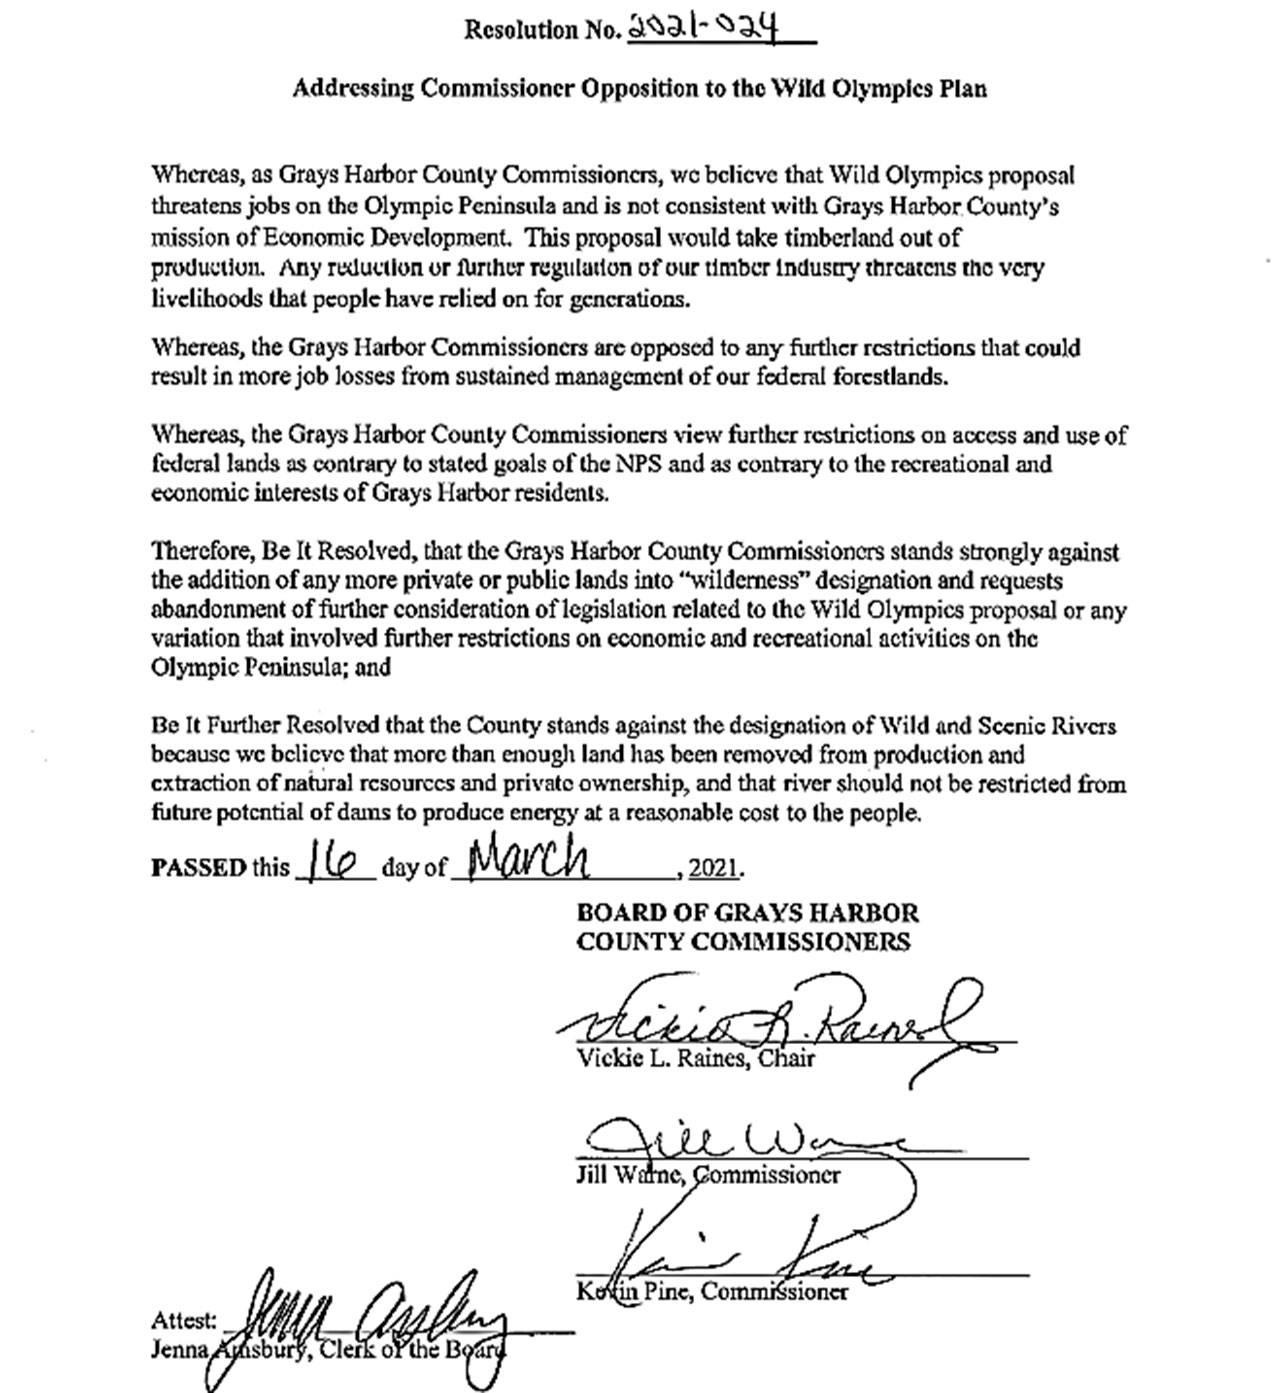 The Wild Olympics resolution signed by all three Grays Harbor County Commissioners.